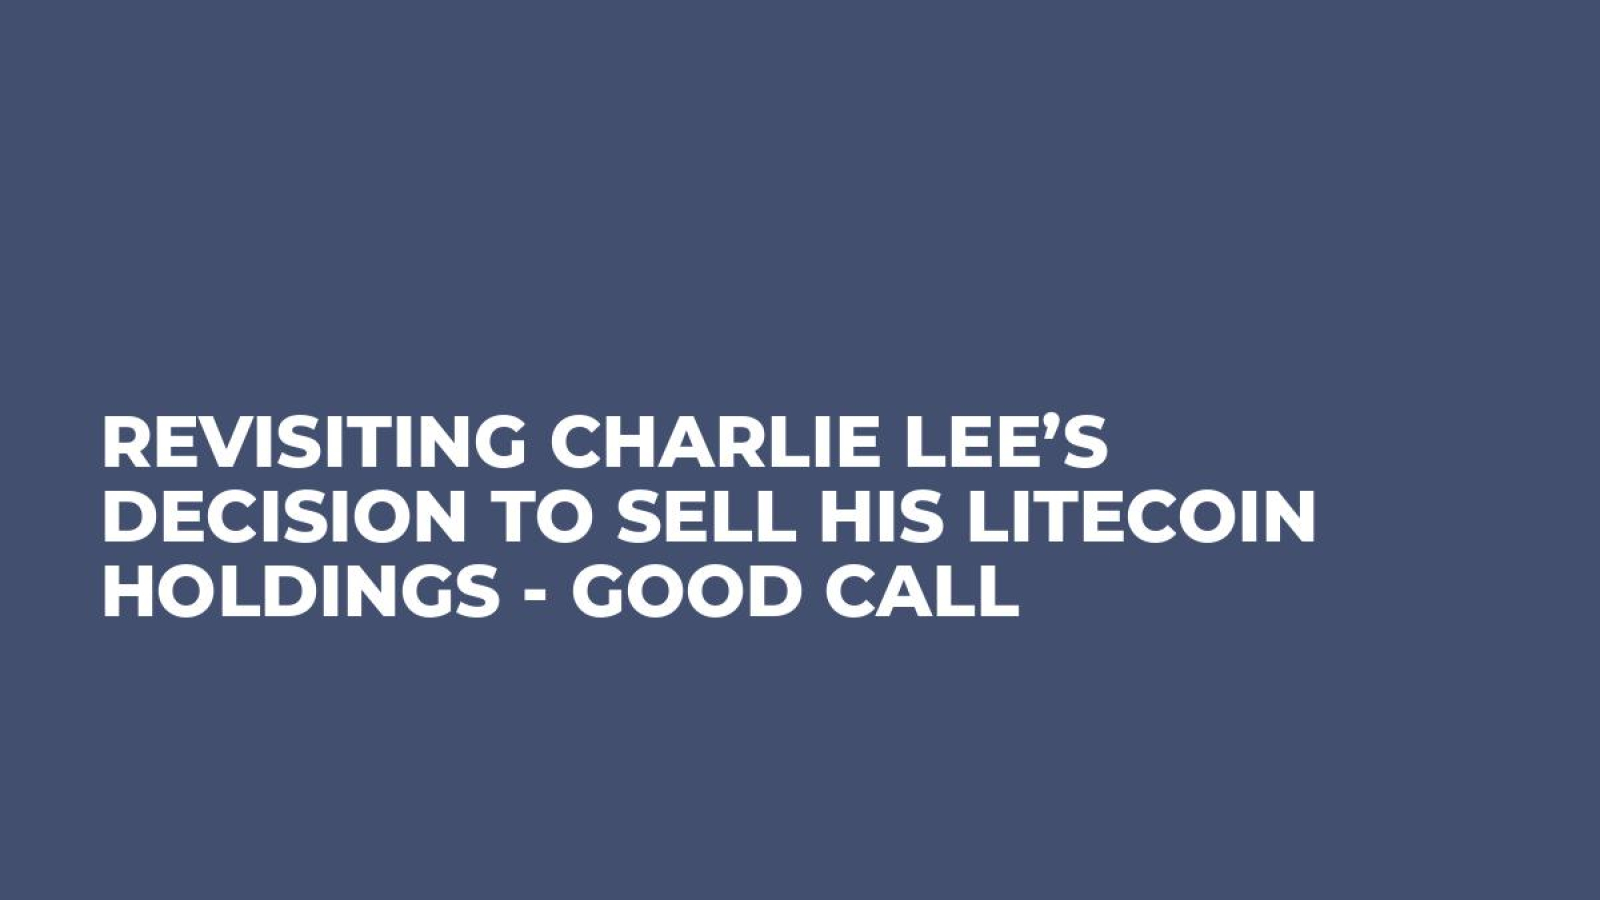 Revisiting Charlie Lee’s Decision to Sell His Litecoin Holdings - Good Call